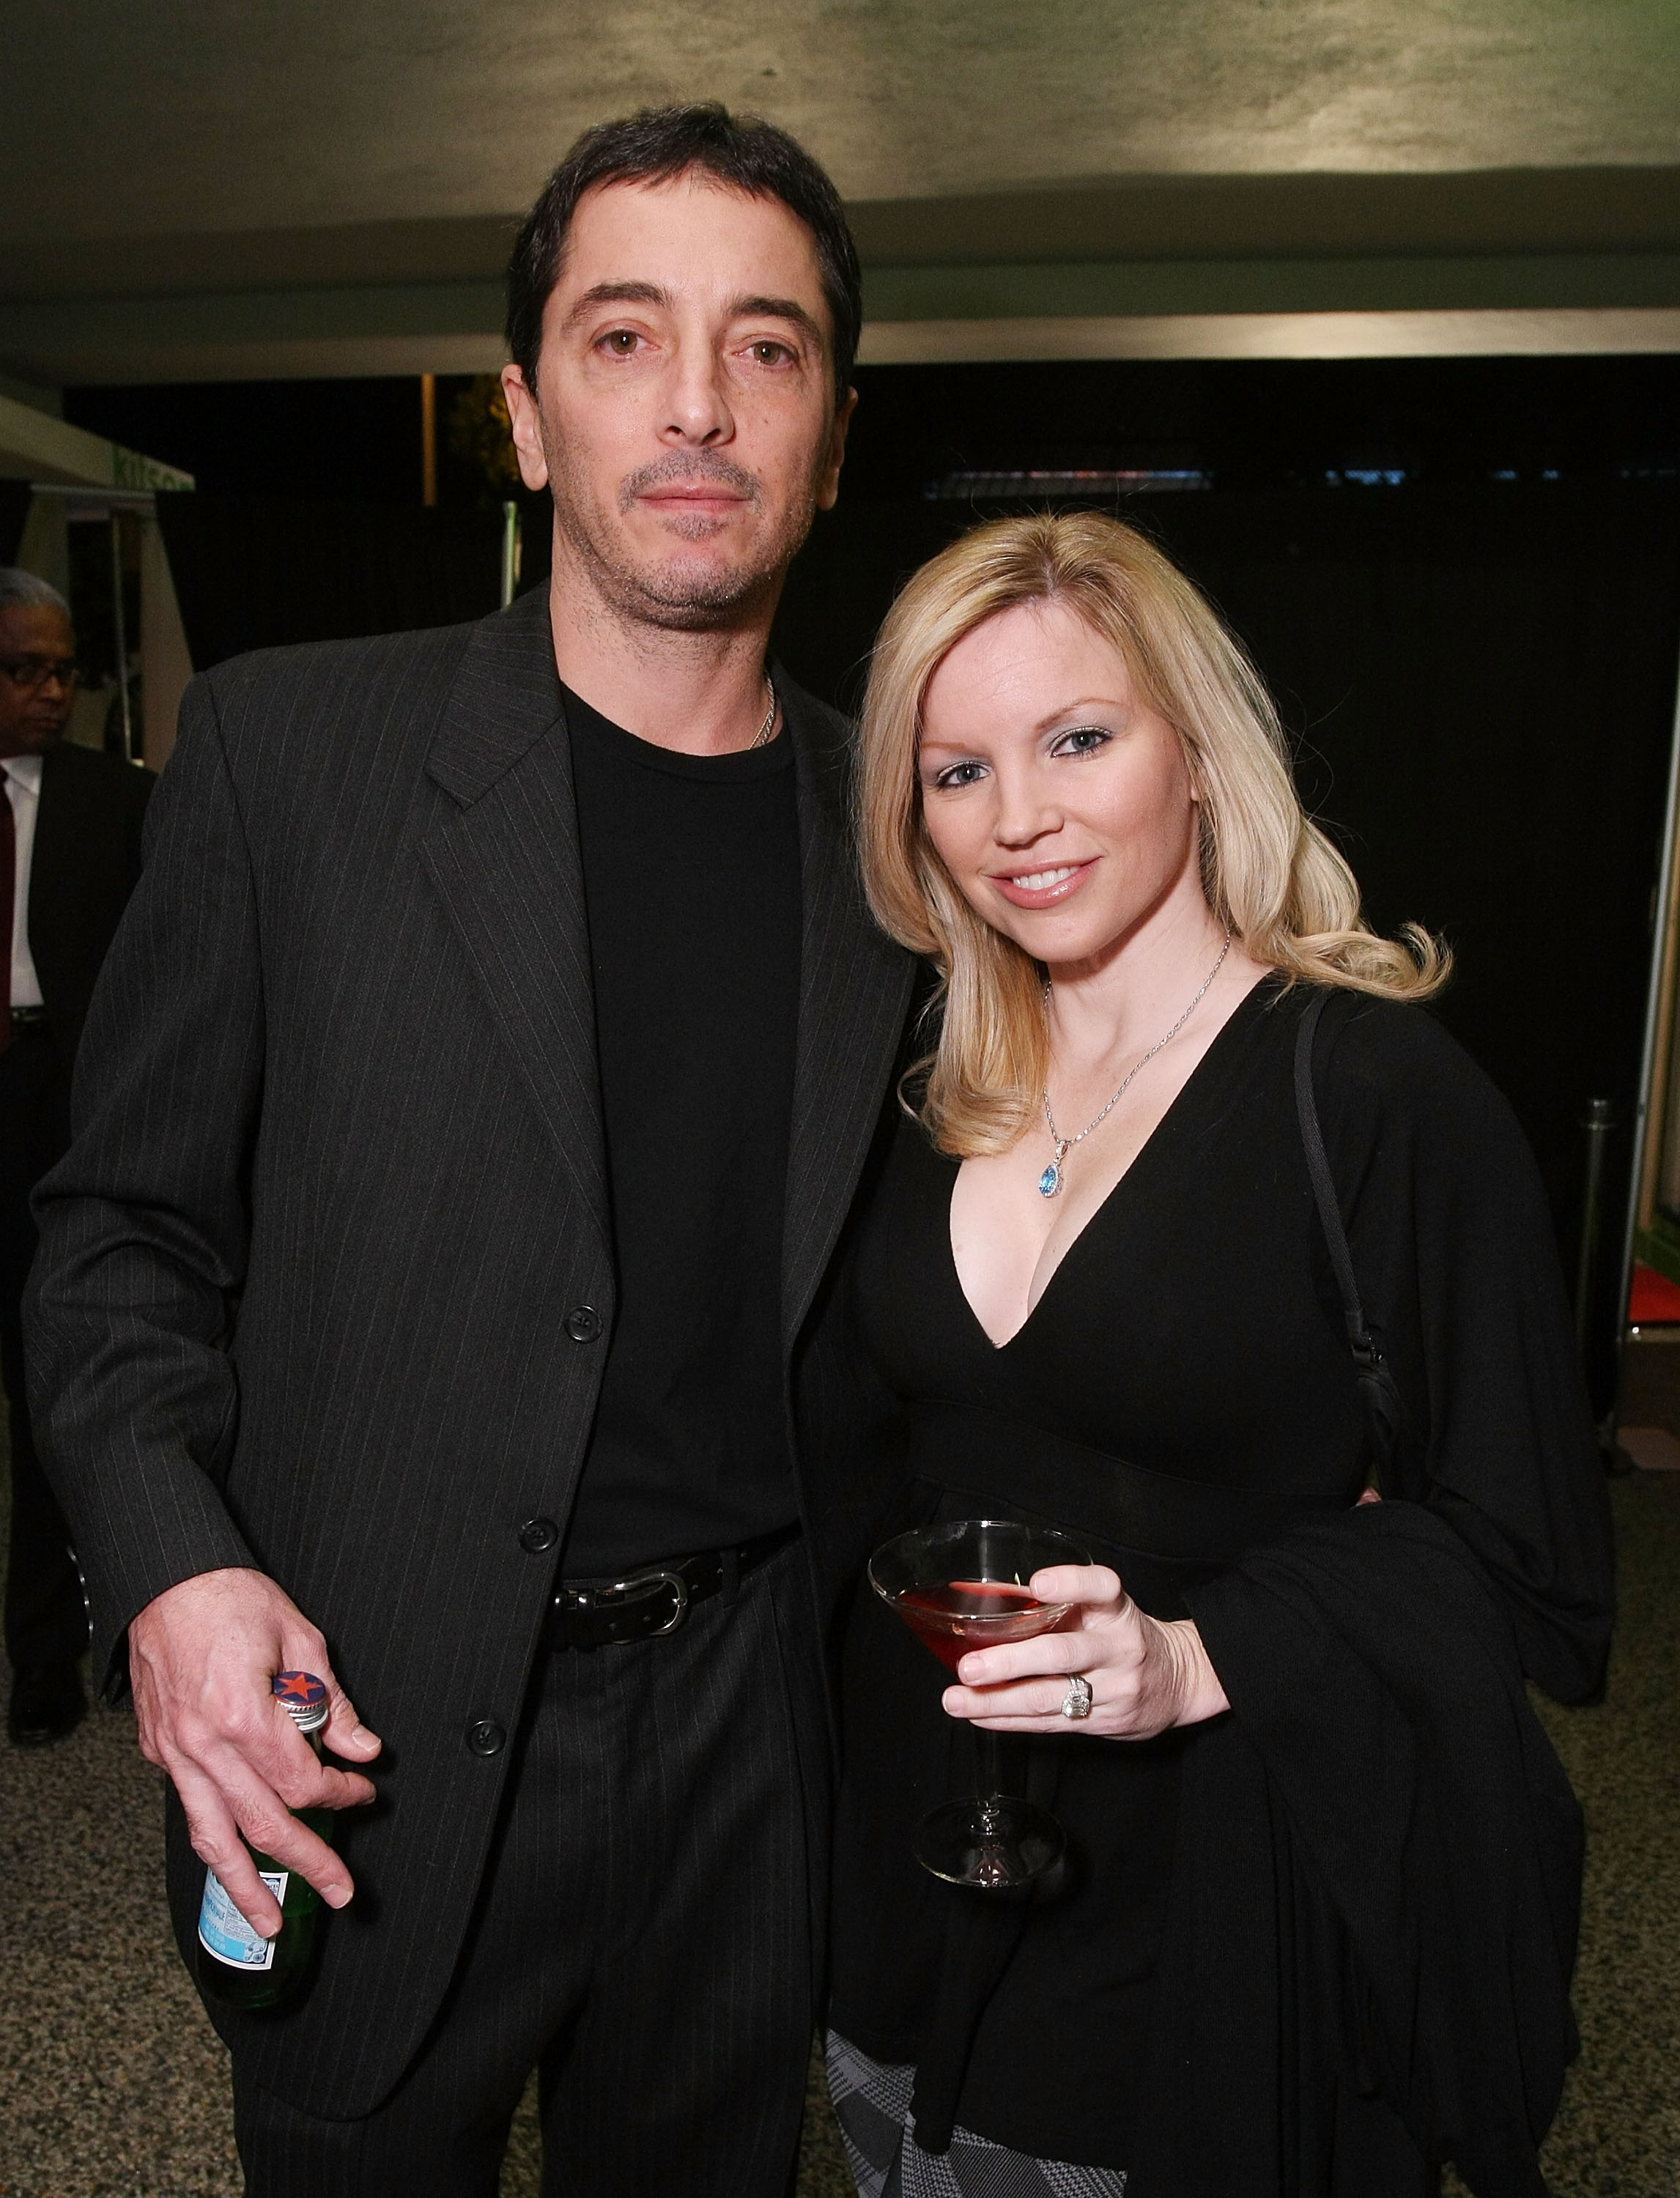 Scott Baio and Renee Sloan at the "Stand Up To Cancer" charity event at Kitson Studio on December 10, 2008 in Los Angeles, California. / Source: Getty Images